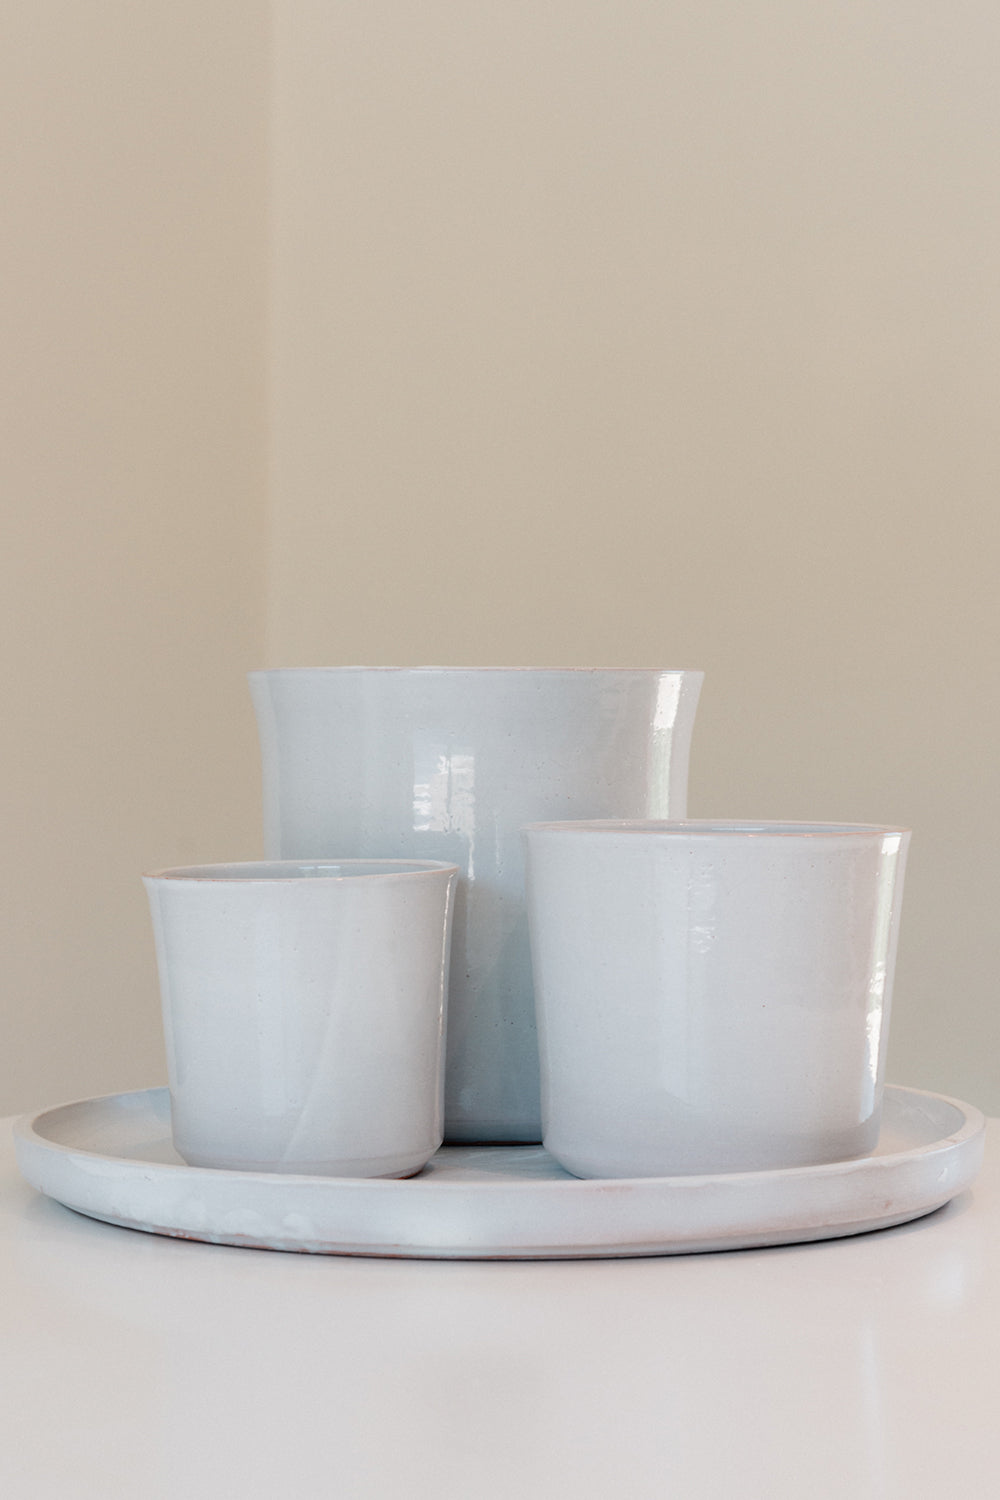 Type DW - Saucer and pots